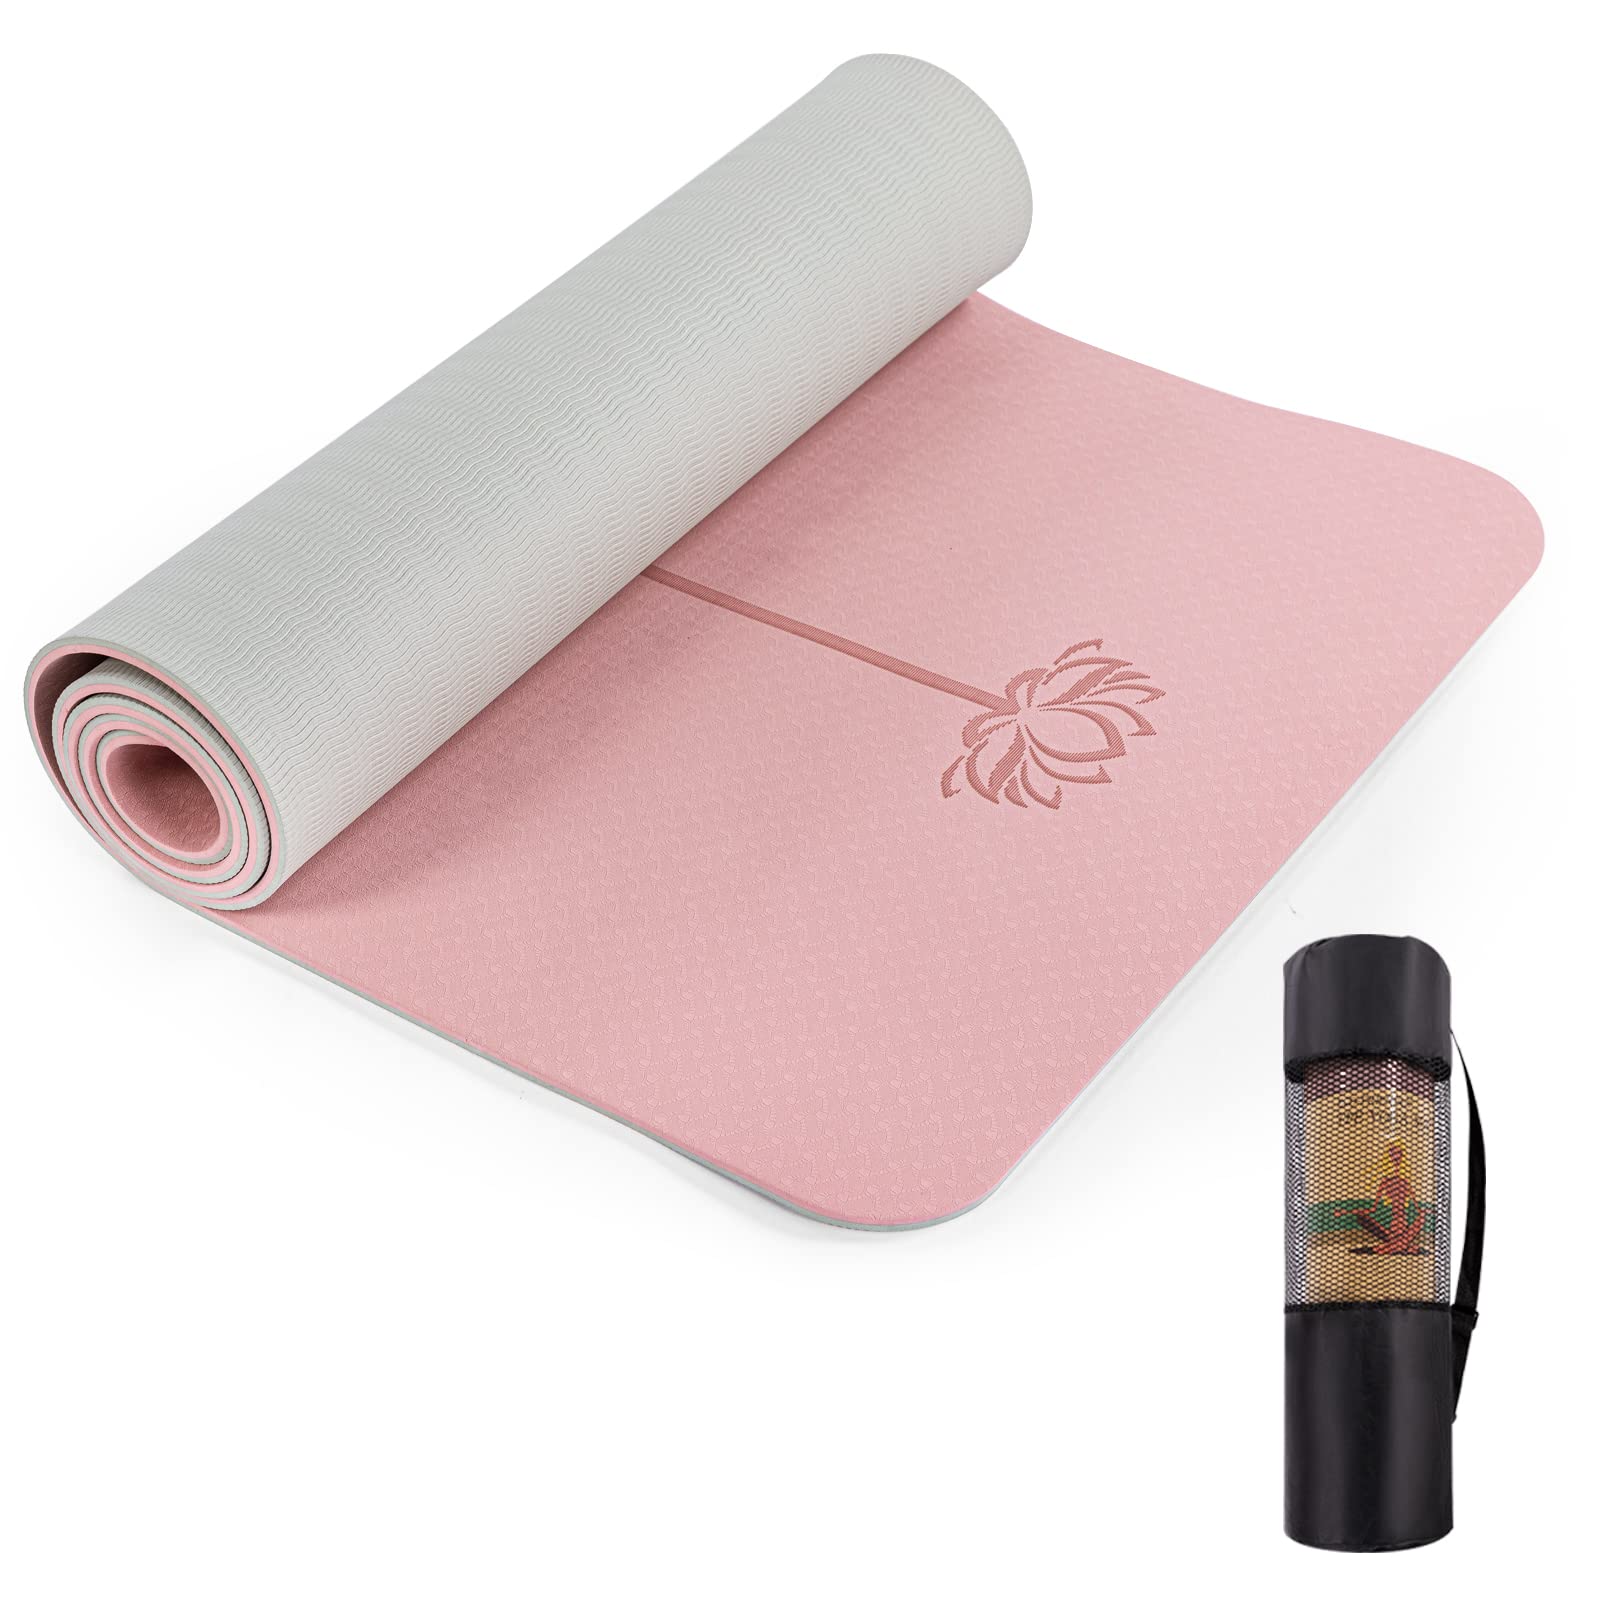  UMINEUX Yoga Mat Extra Thick 1/3 Non Slip Yoga Mats For  Women, Eco Friendly TPE Fitness Exercise Mat